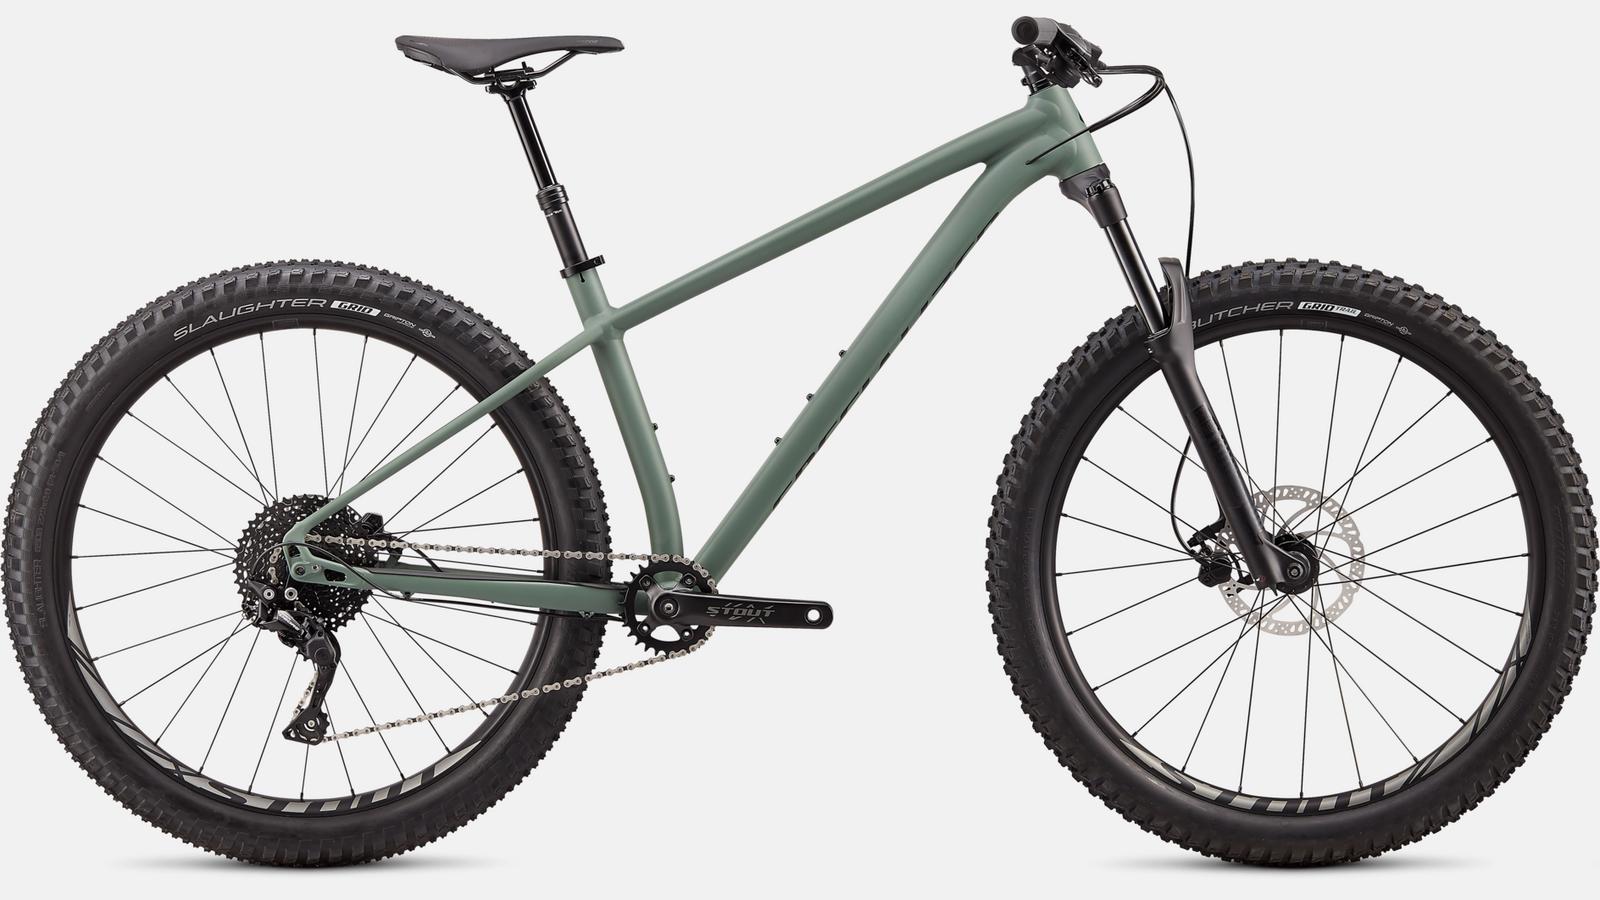 Paint for 2020 Specialized Fuse 27.5 - Satin Sage Green